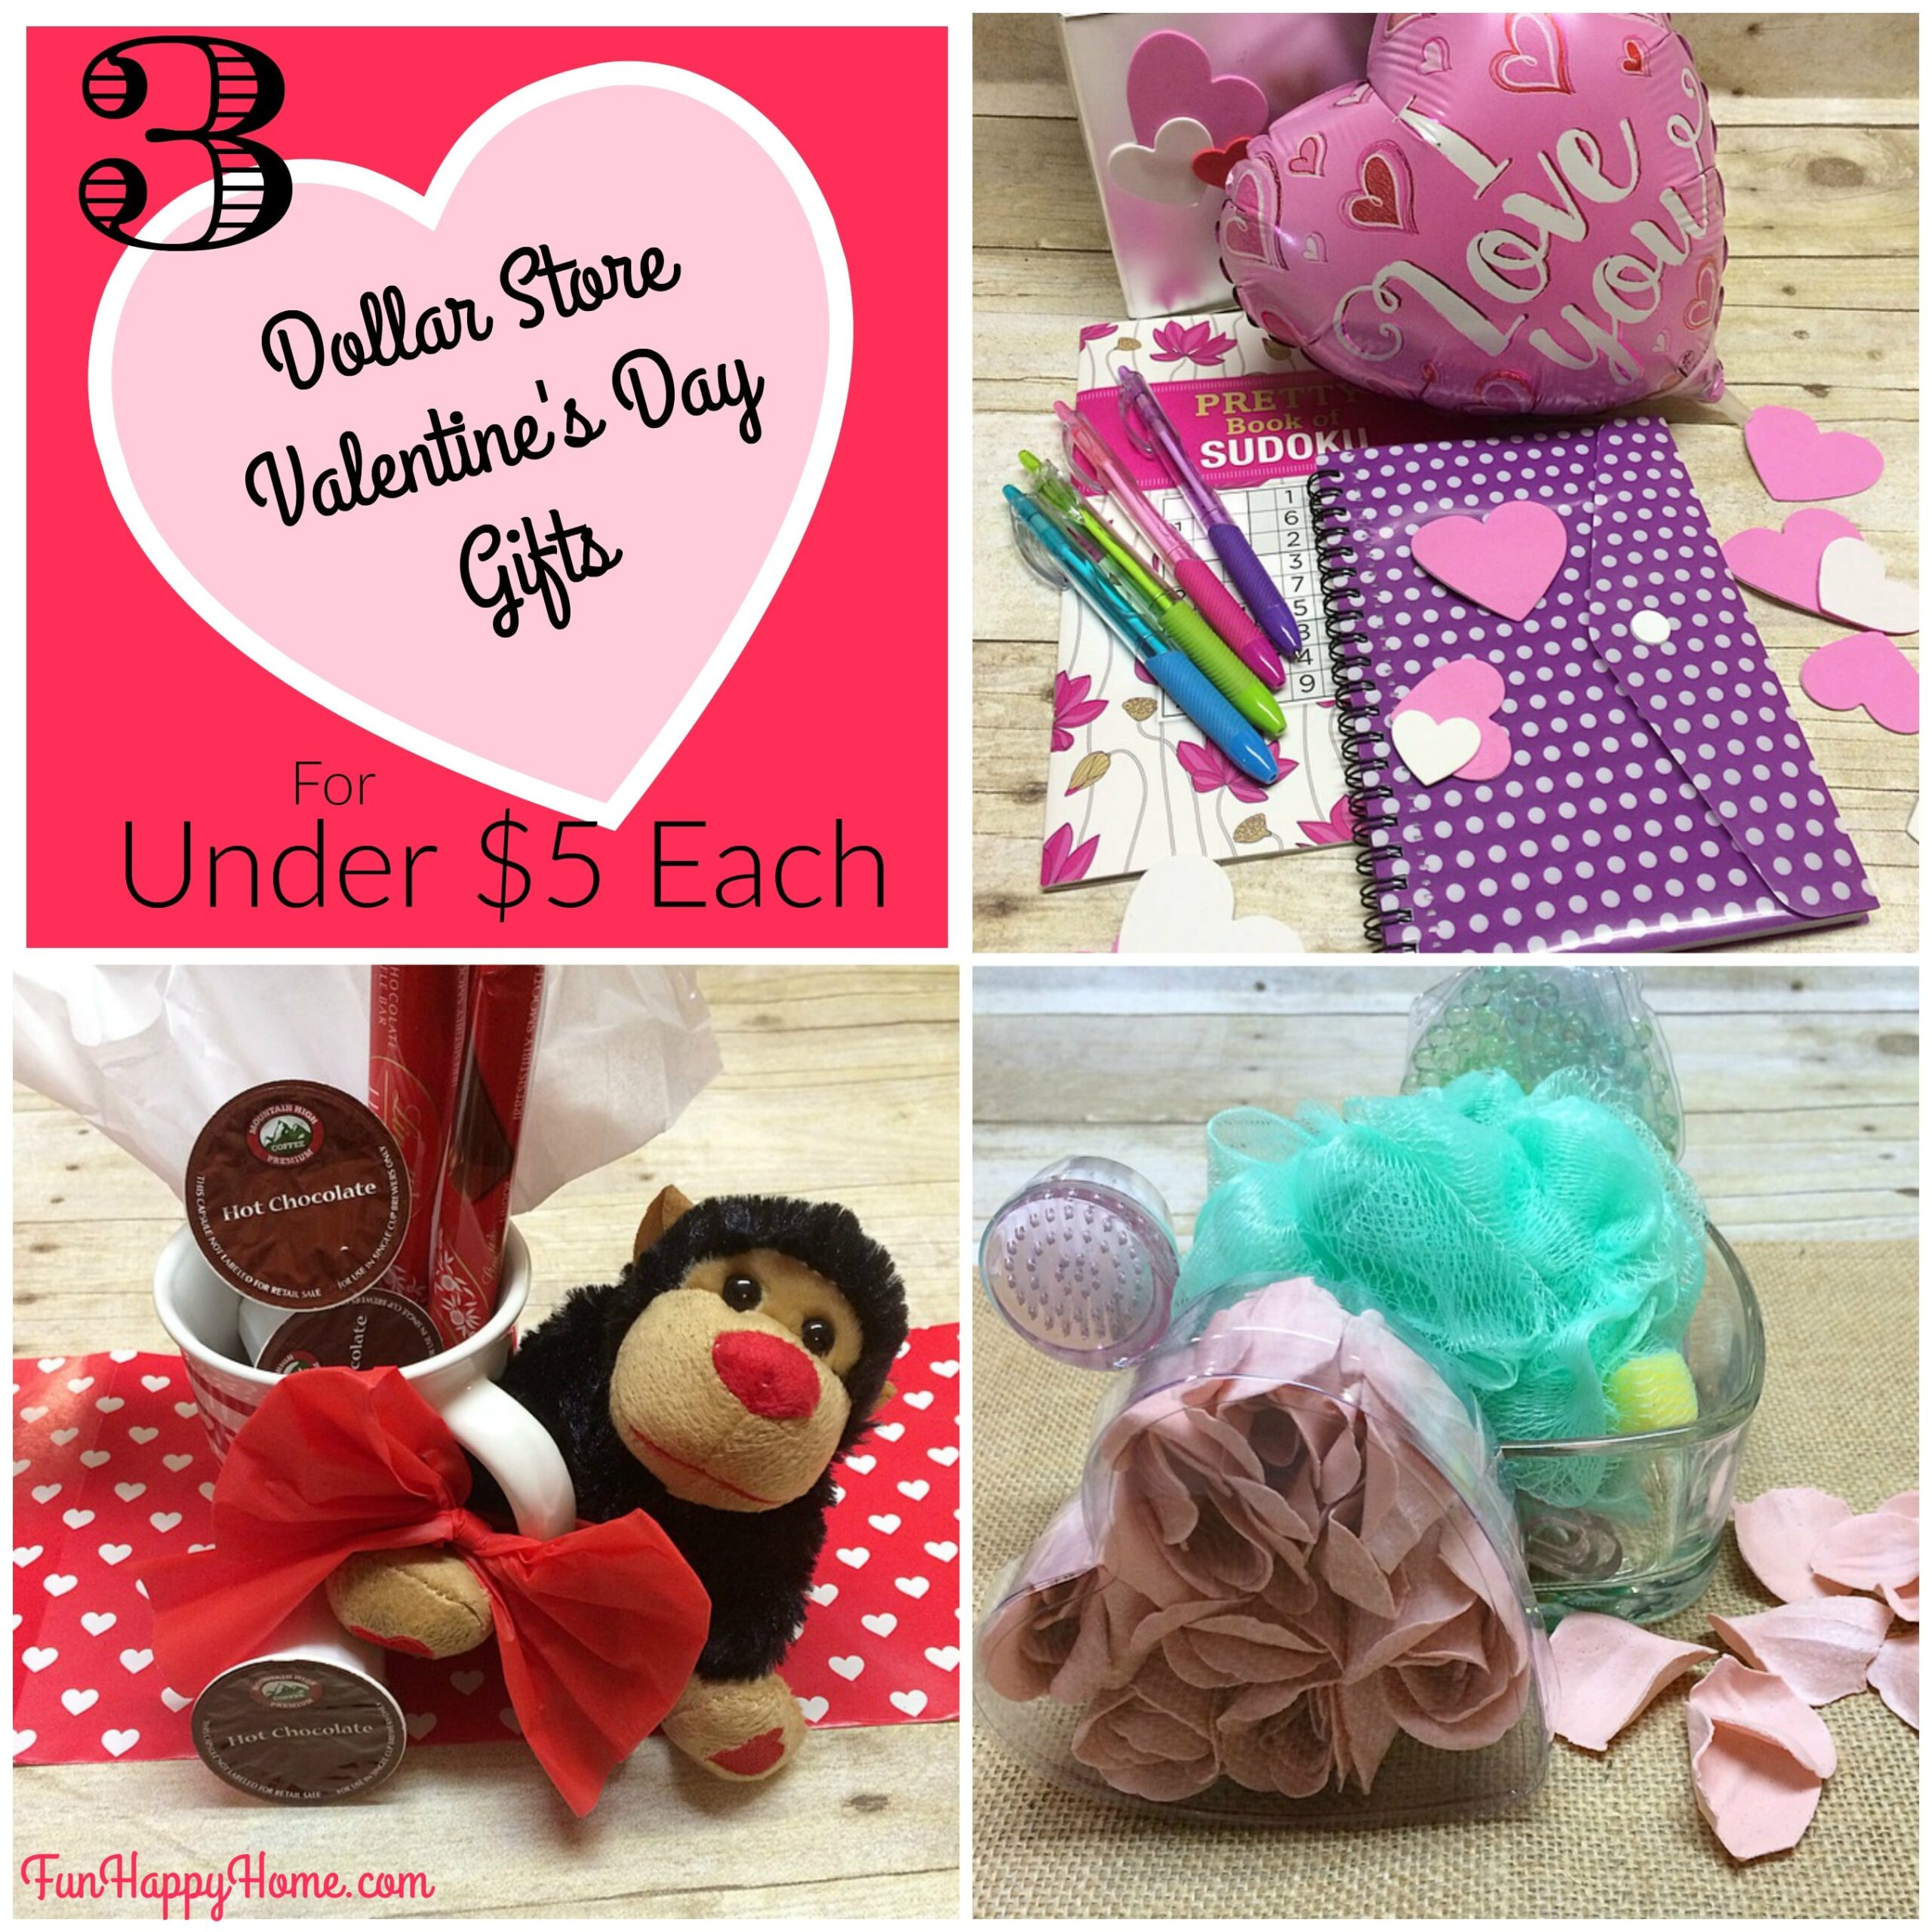 What Is A Good Valentines Day Gift
 3 Easy Dollar Store Valentine s Day Gifts Fun Happy Home